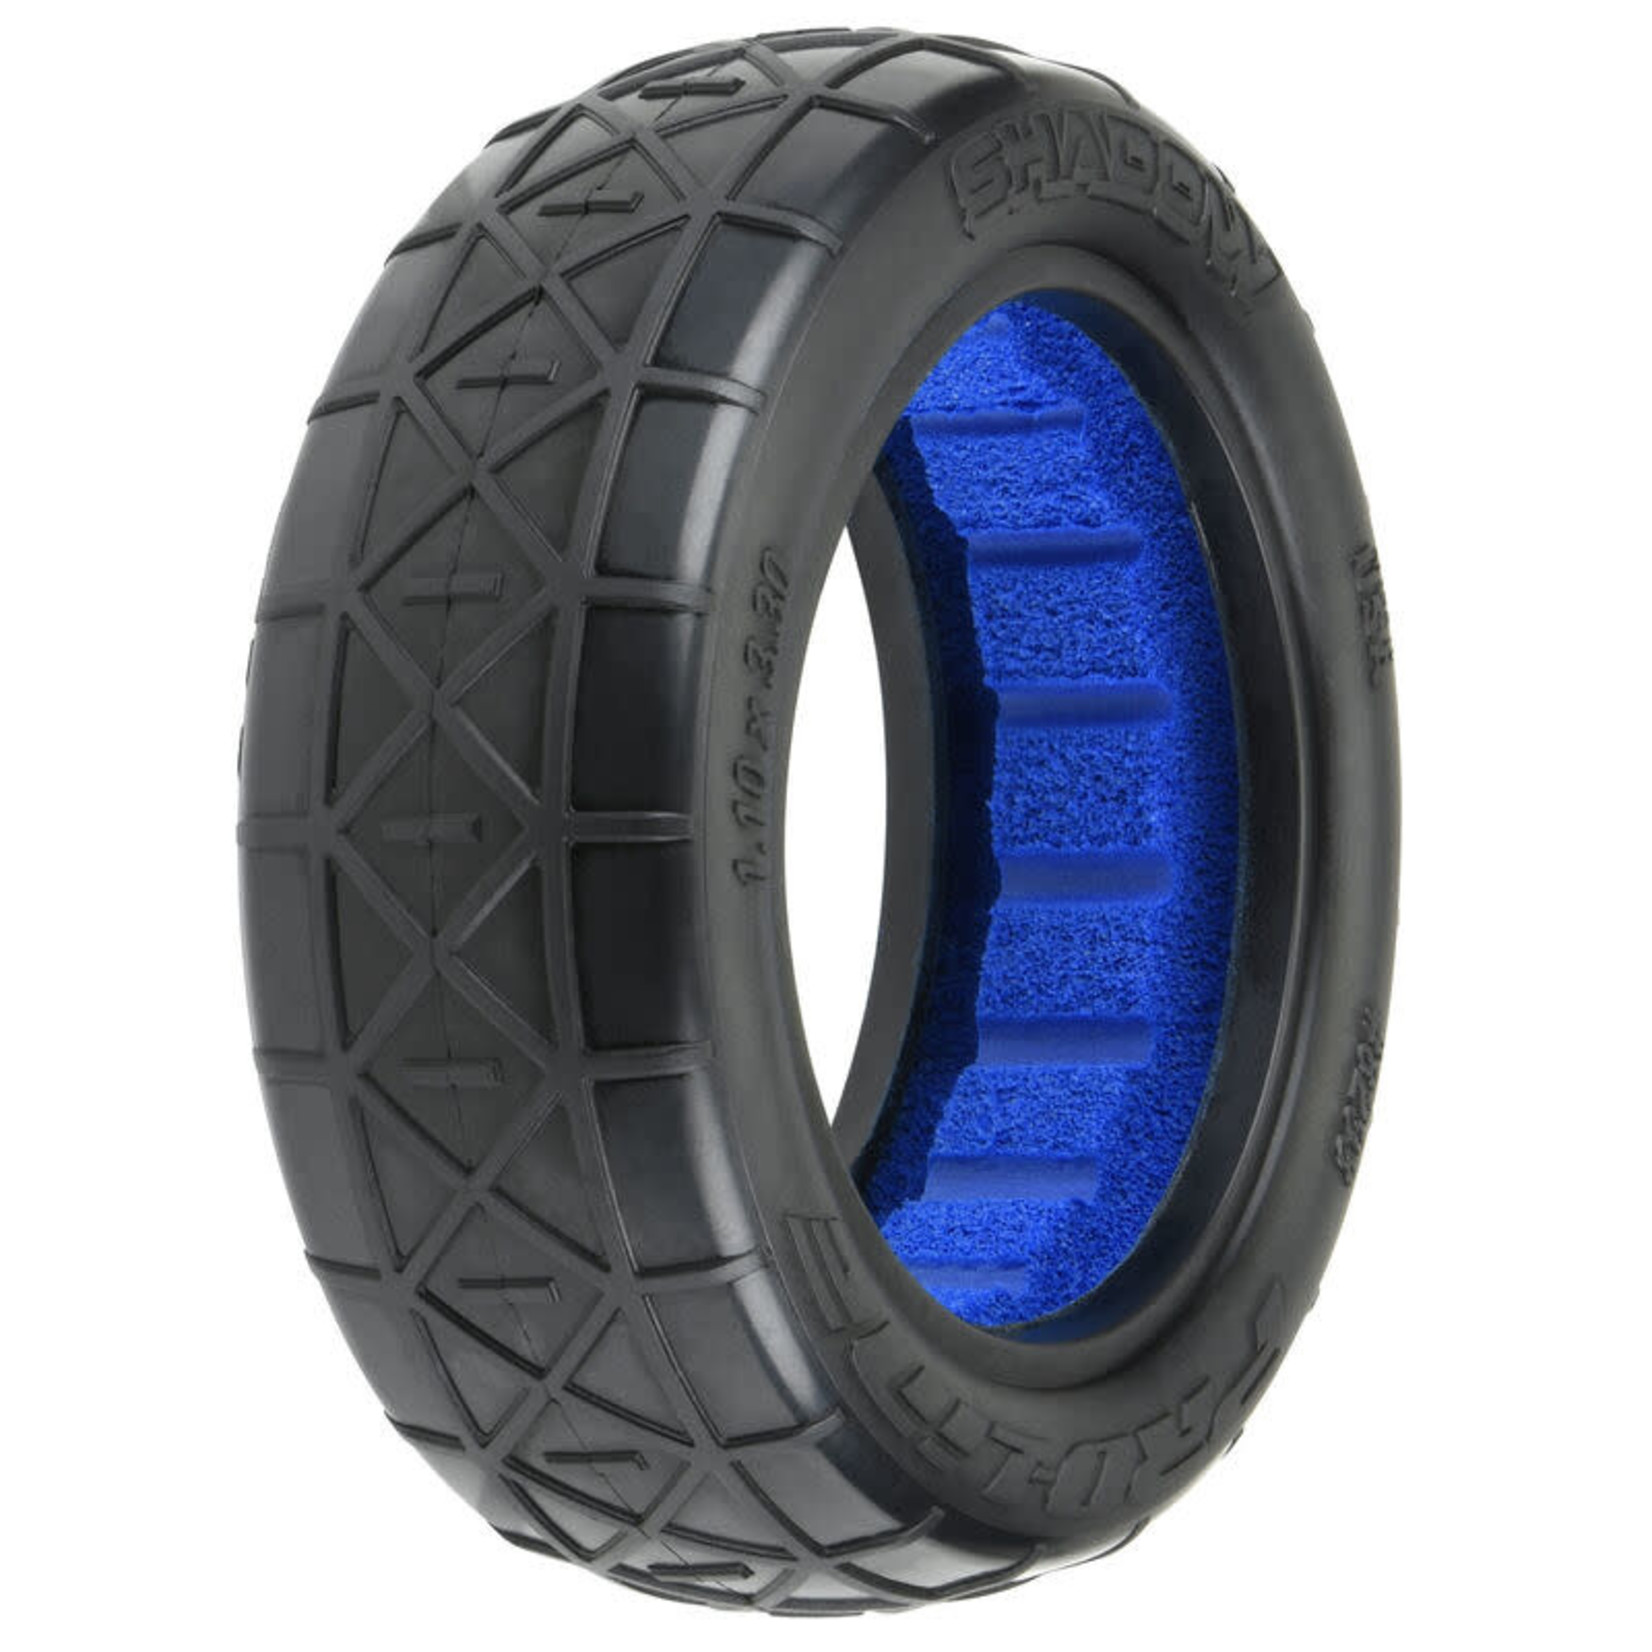 Pro-line Racing PRO8293204 Pro-Line Shadow 2.2" 2WD S4 Buggy Front Tires (2) ##